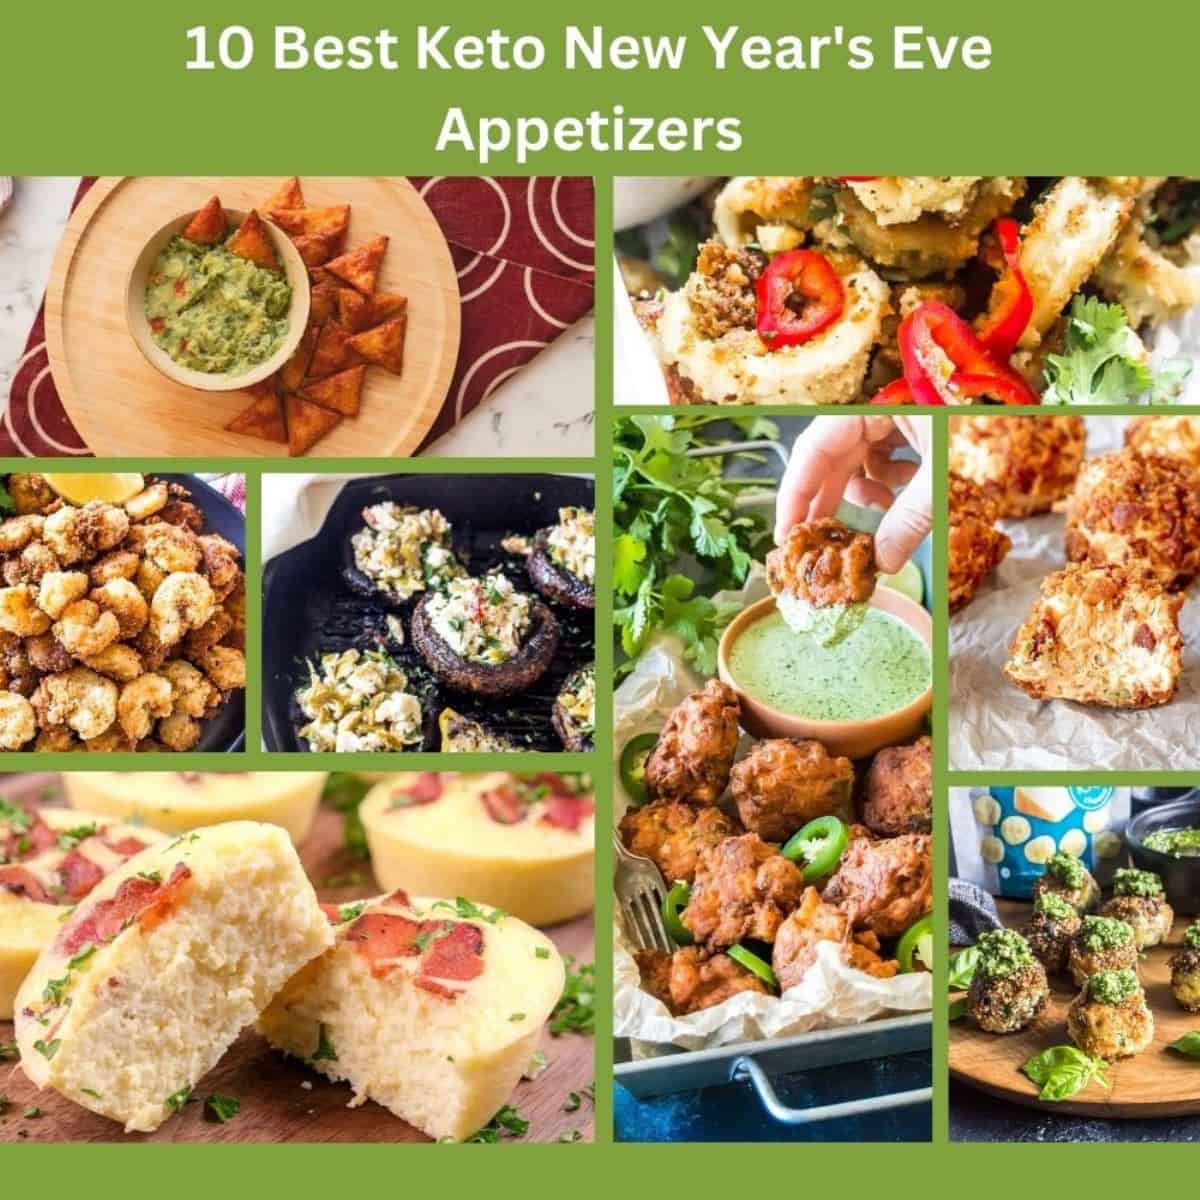 10 Best Keto New Year's Eve Appetizers - Cast Iron Keto